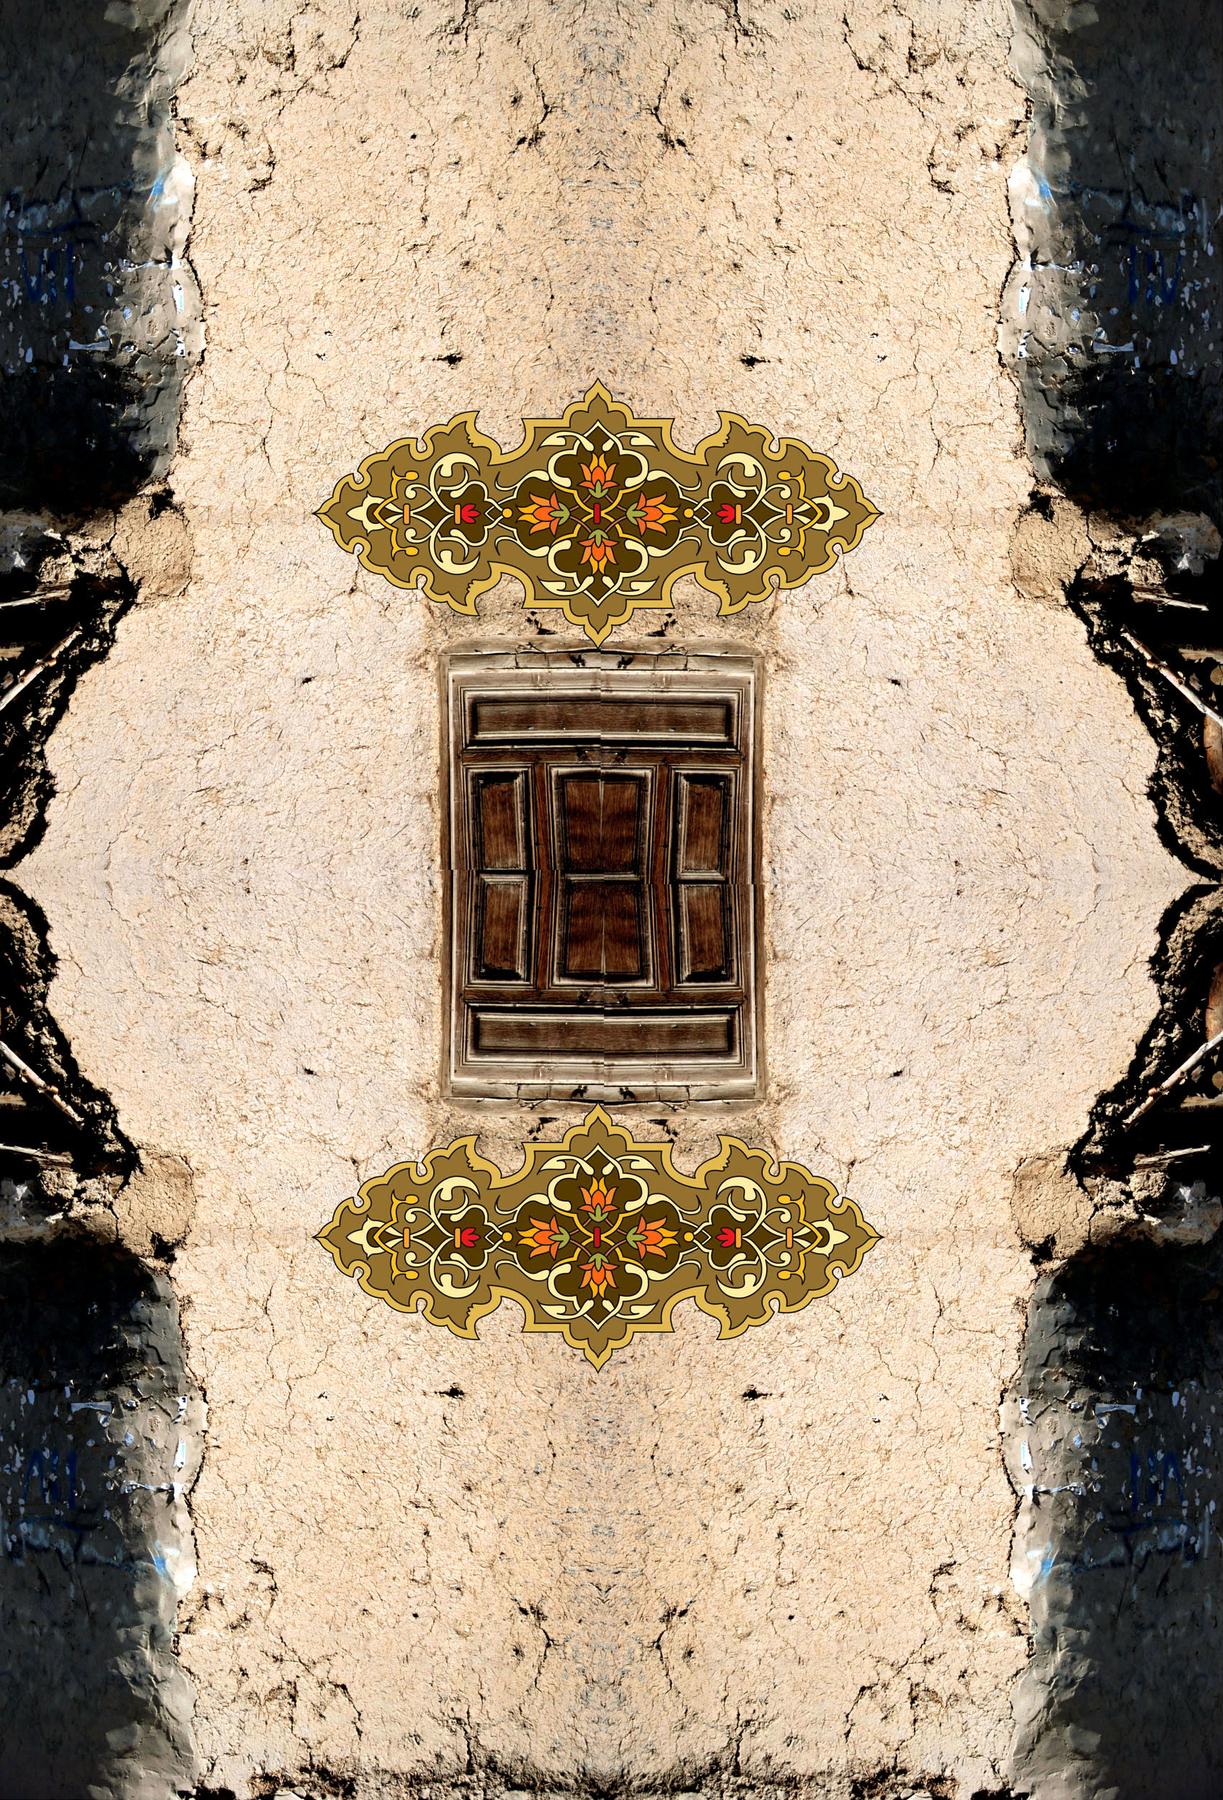 Image for entry 'Rug 2'